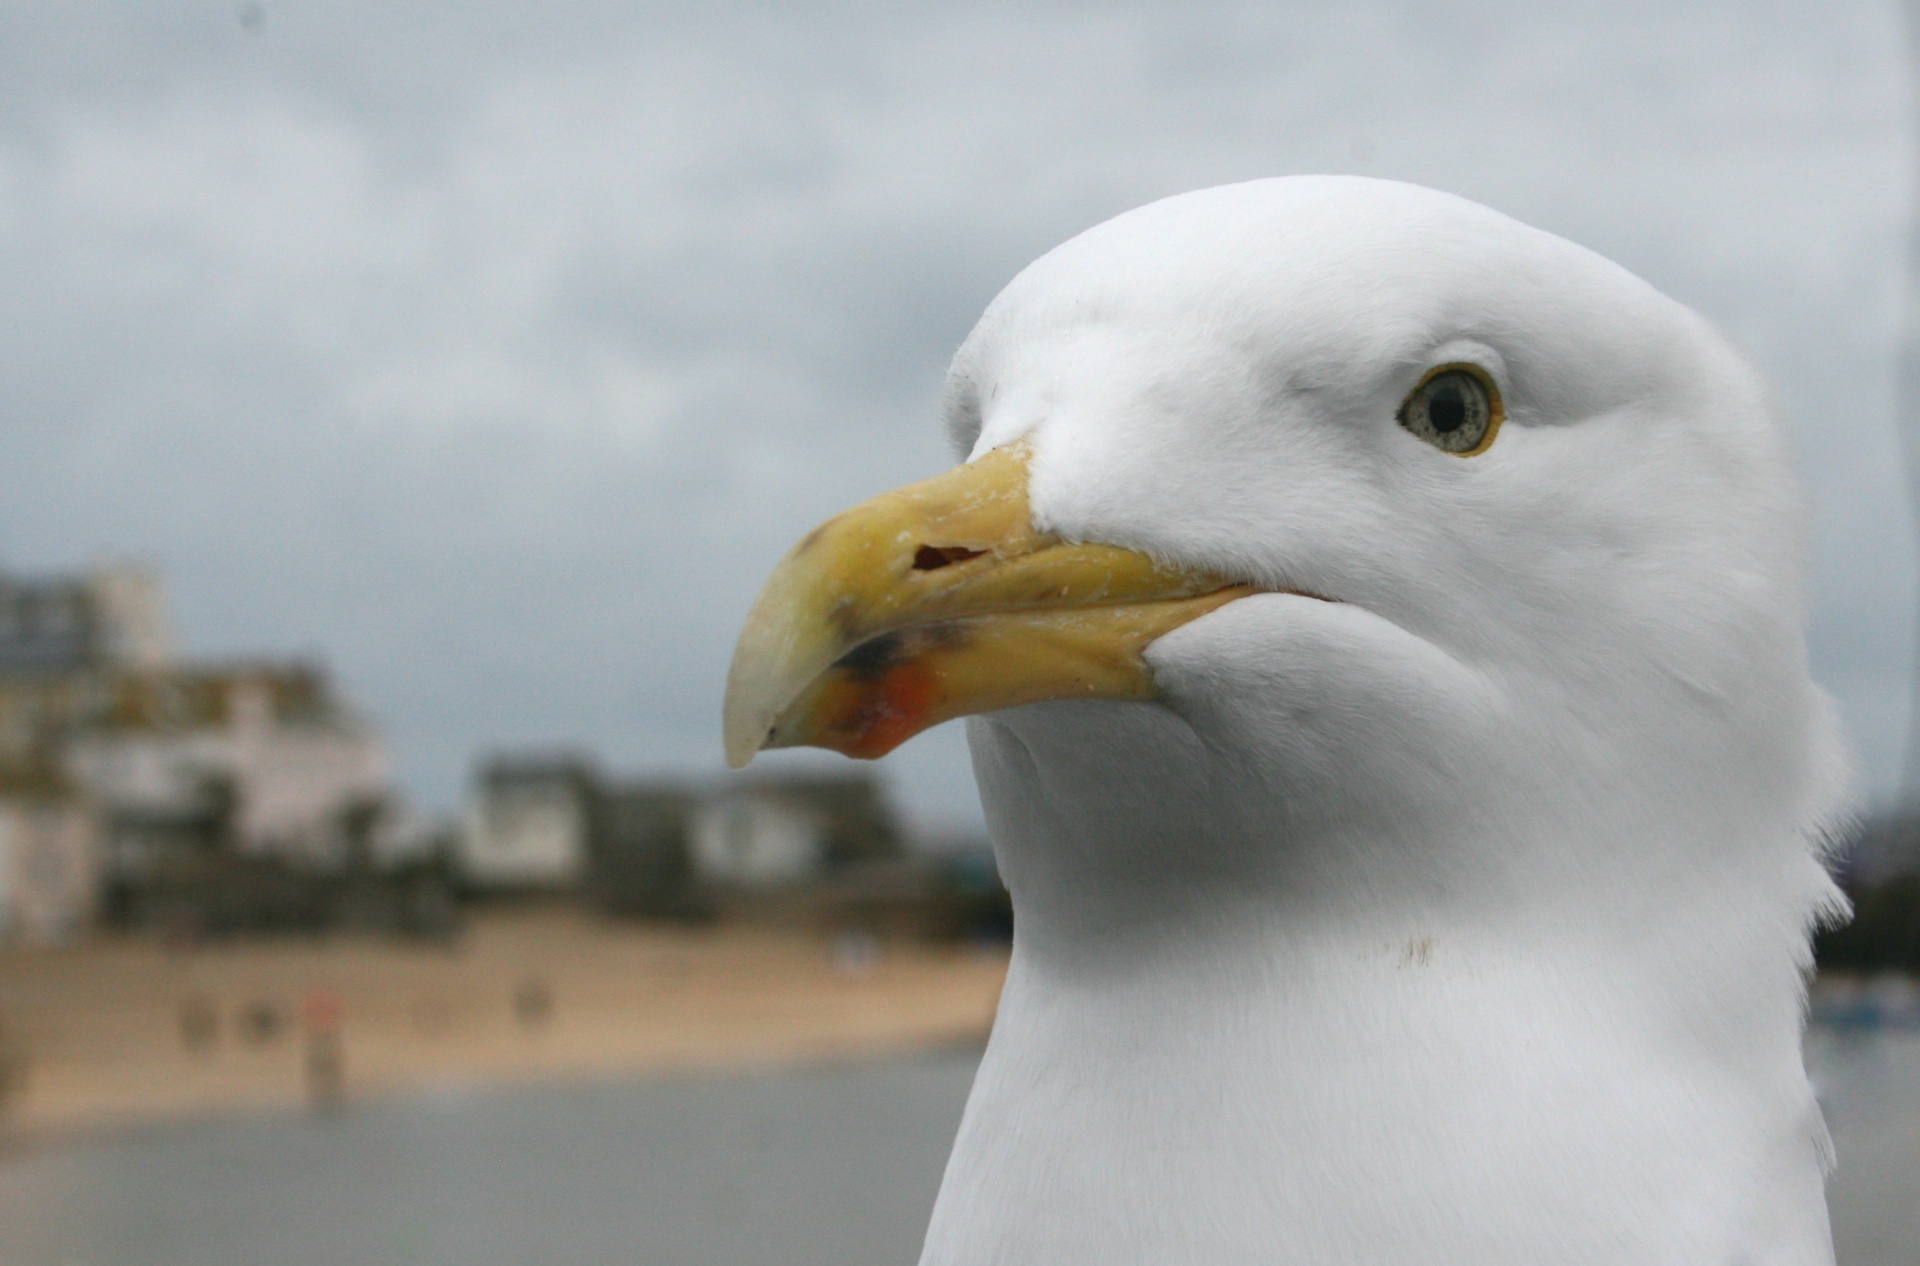 Close-up of a seagull against a blurred-out seaside background